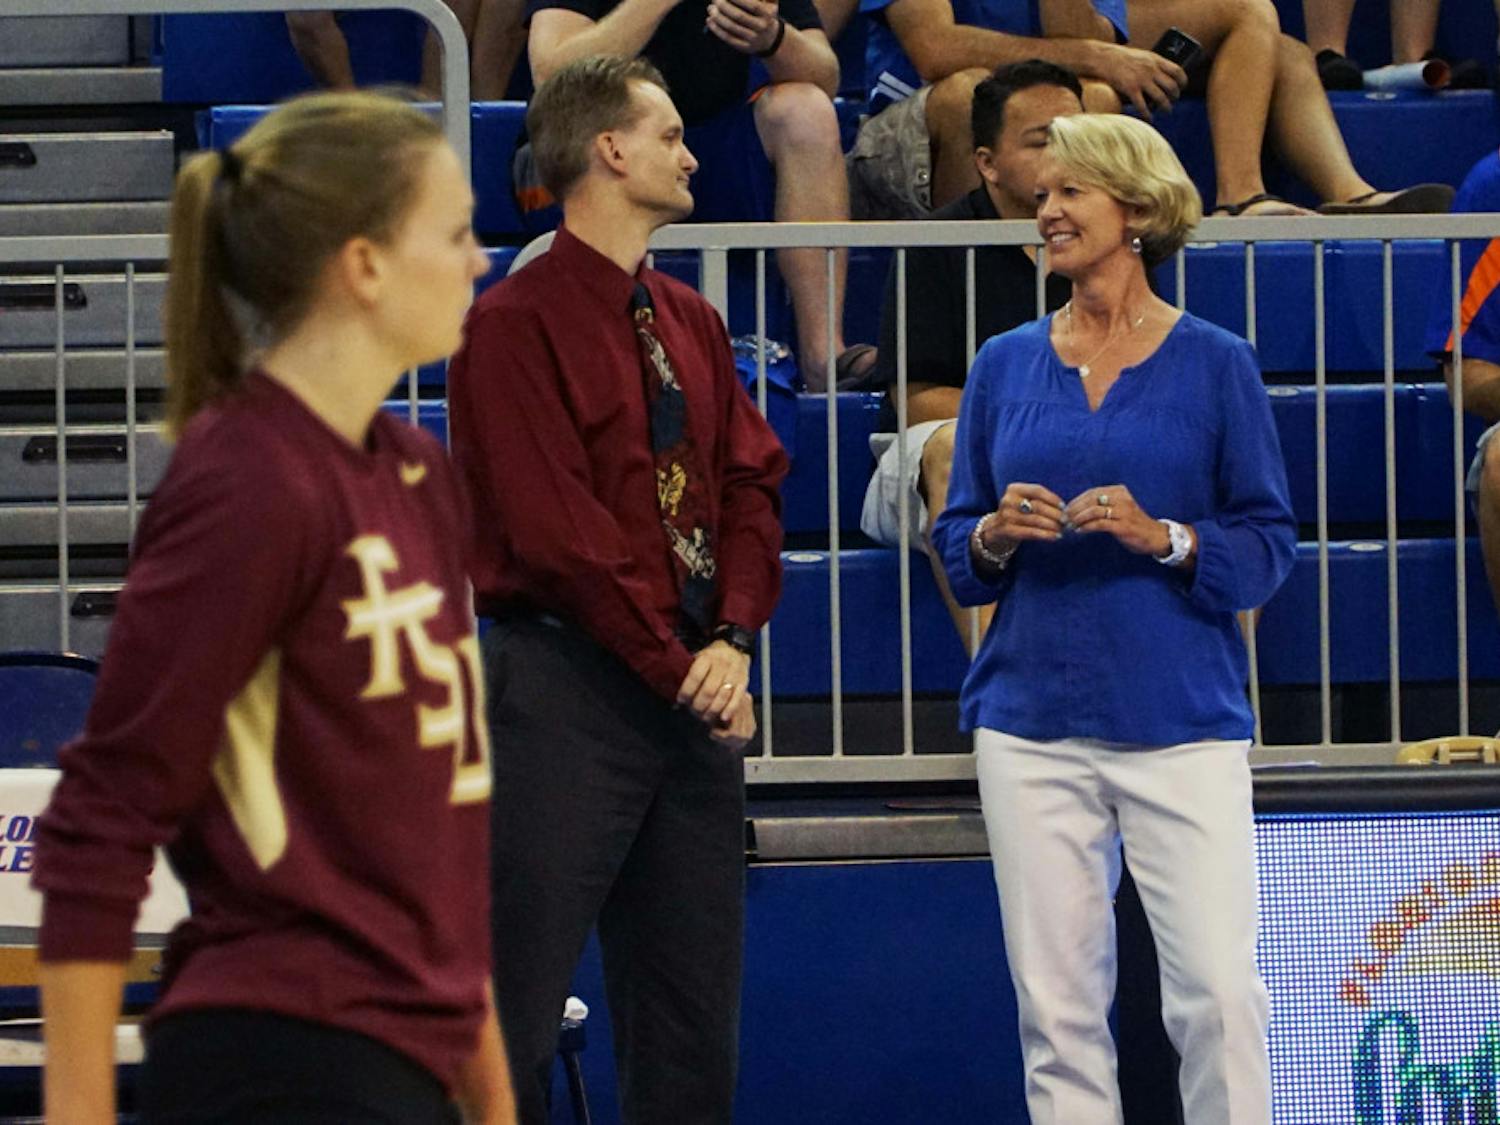 UF coach Mary Wise (right) talks with FSU coach Chris Poole prior to Florida's 3-1 win on Sept. 20, 2015, in the O'Connell Center.